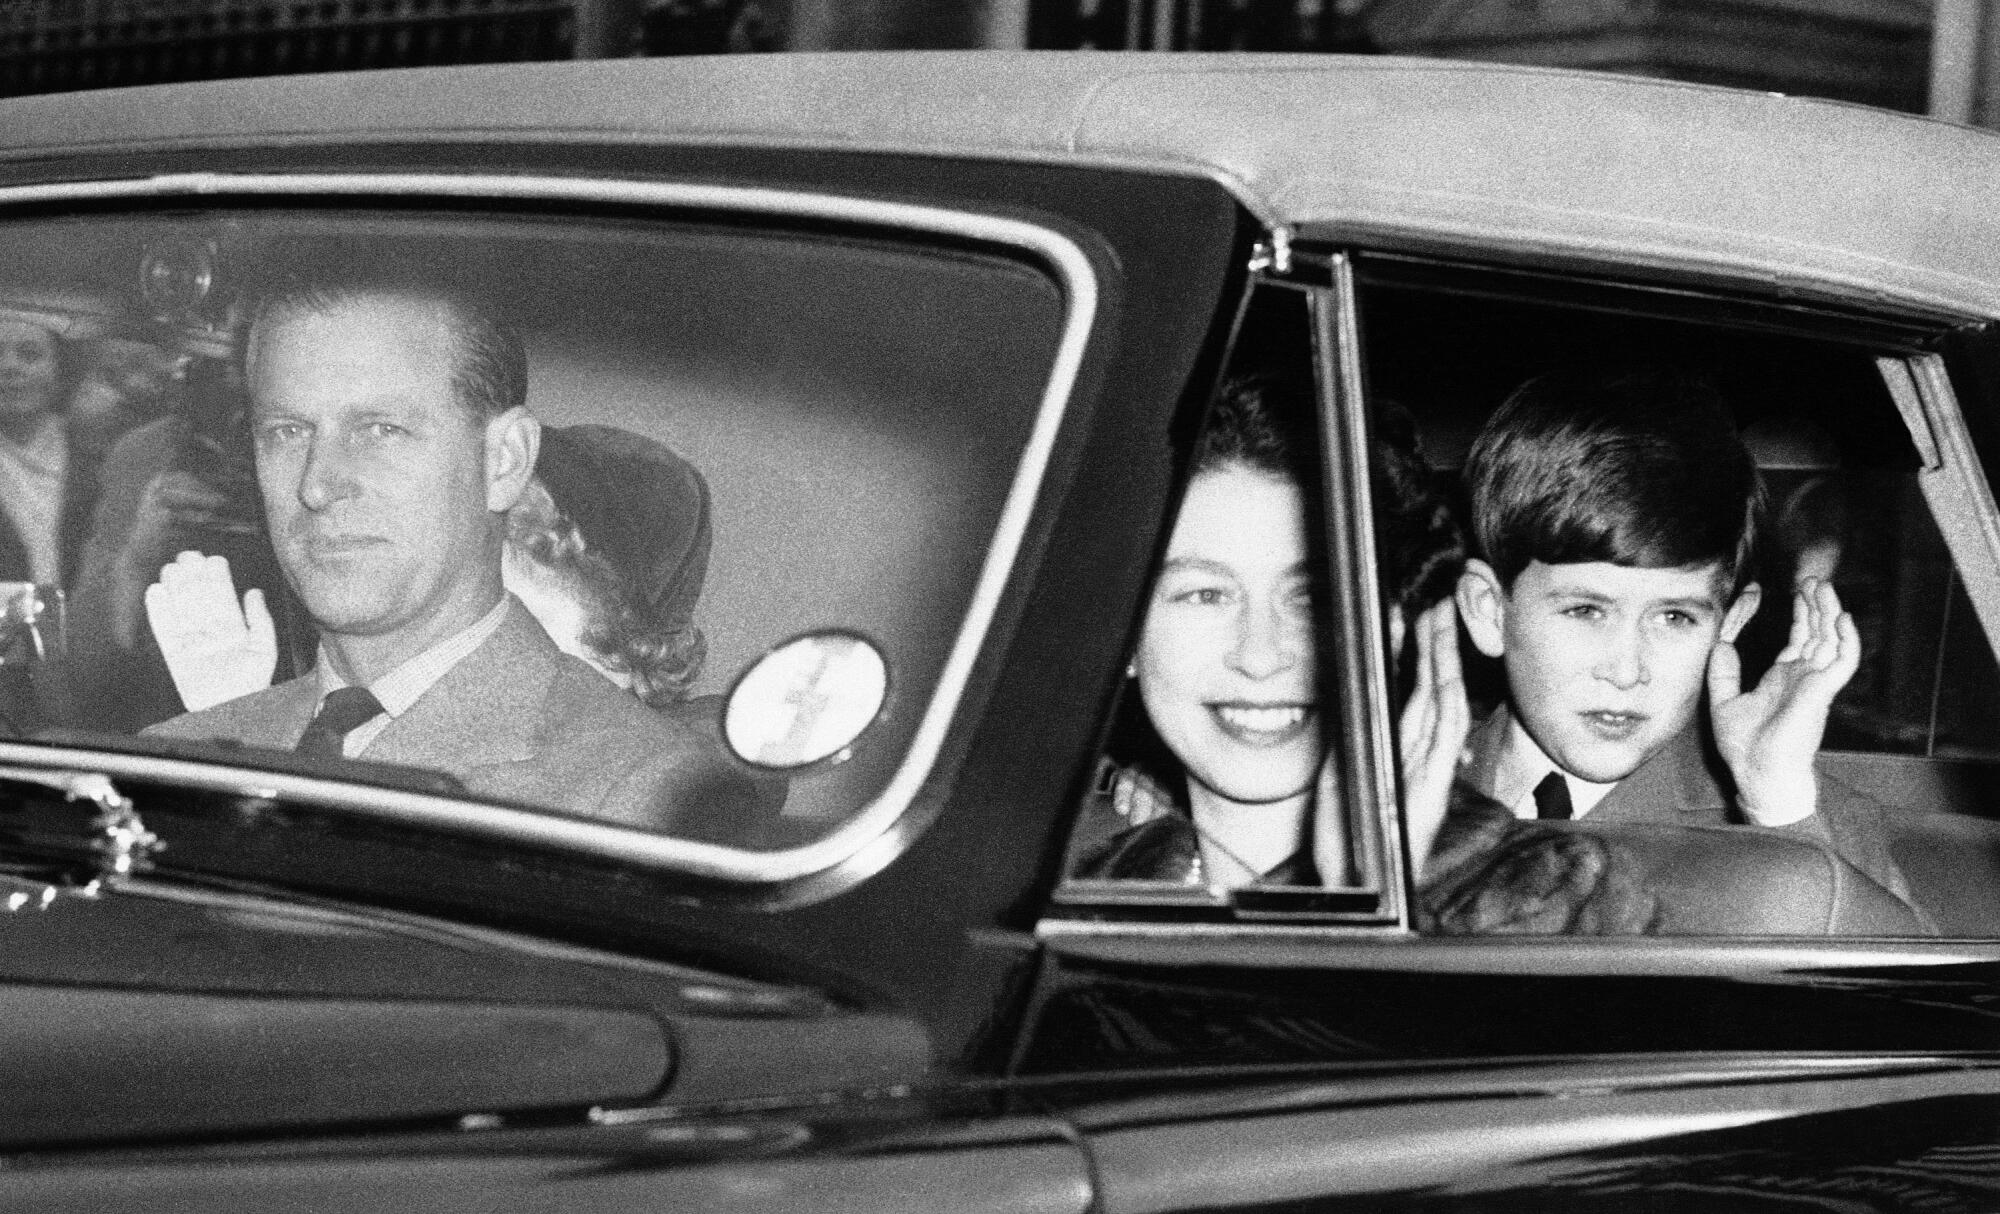 Prince Philip behind the wheel of a car with Queen Elizabeth II and a young Prince Charles and Princess Anne